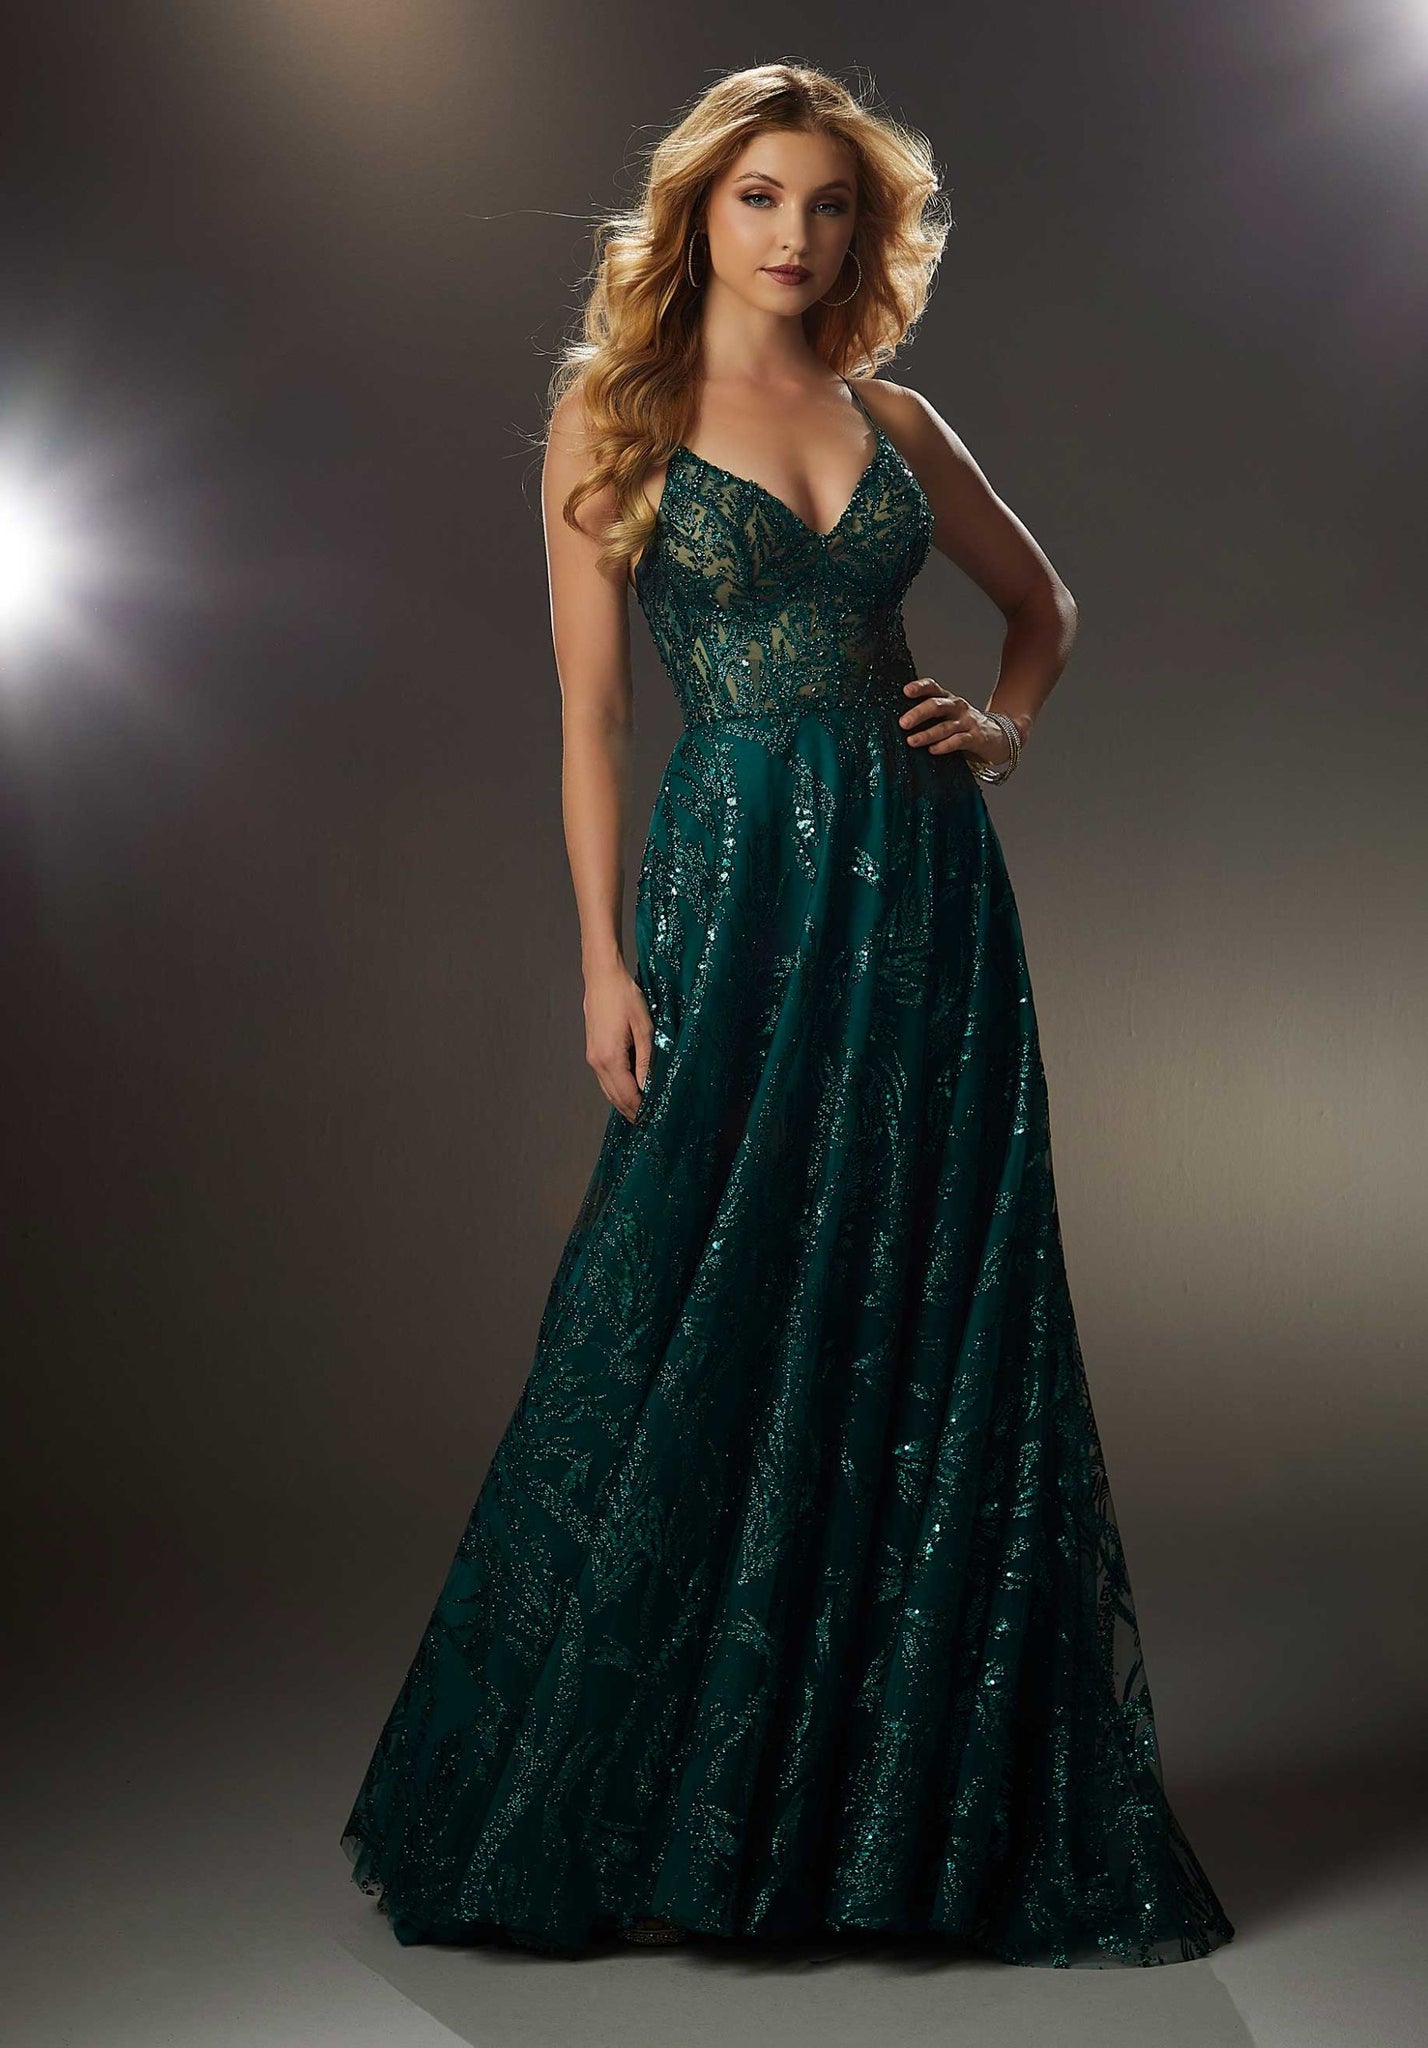 Classic A-line prom dress features a sheer deep-v bodice and flowing skirt designed with sparkling patterned glitter and blingy beaded trim. The spaghetti straps cross in the back meeting up with the lace-up corset back.